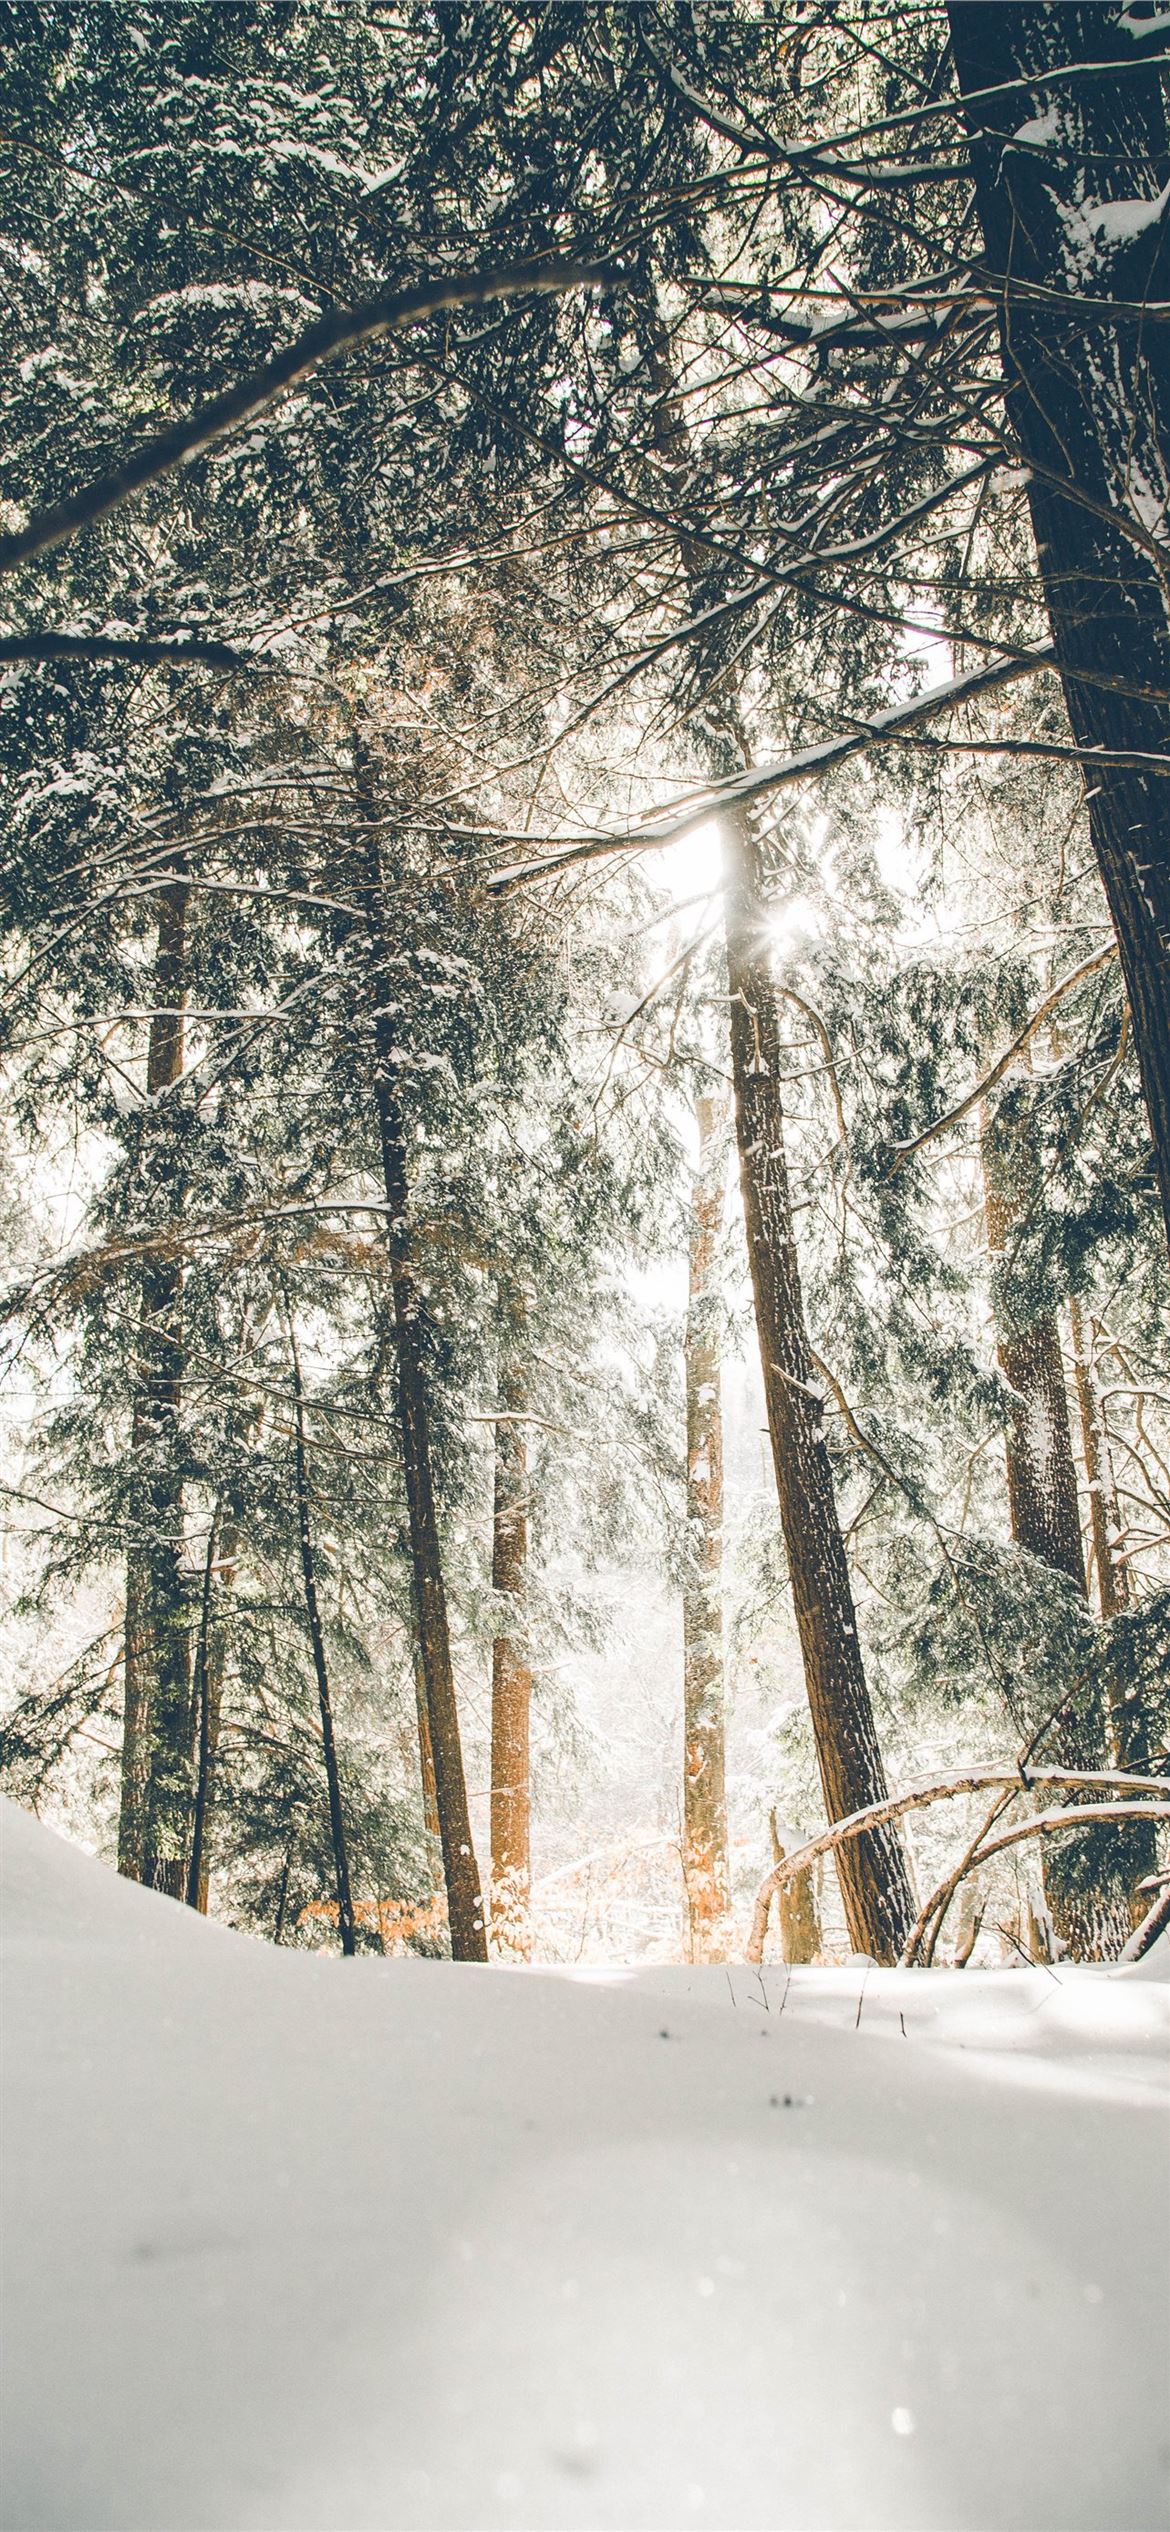 trees covered with snow during daytime iPhone 12 Wallpaper Free Download